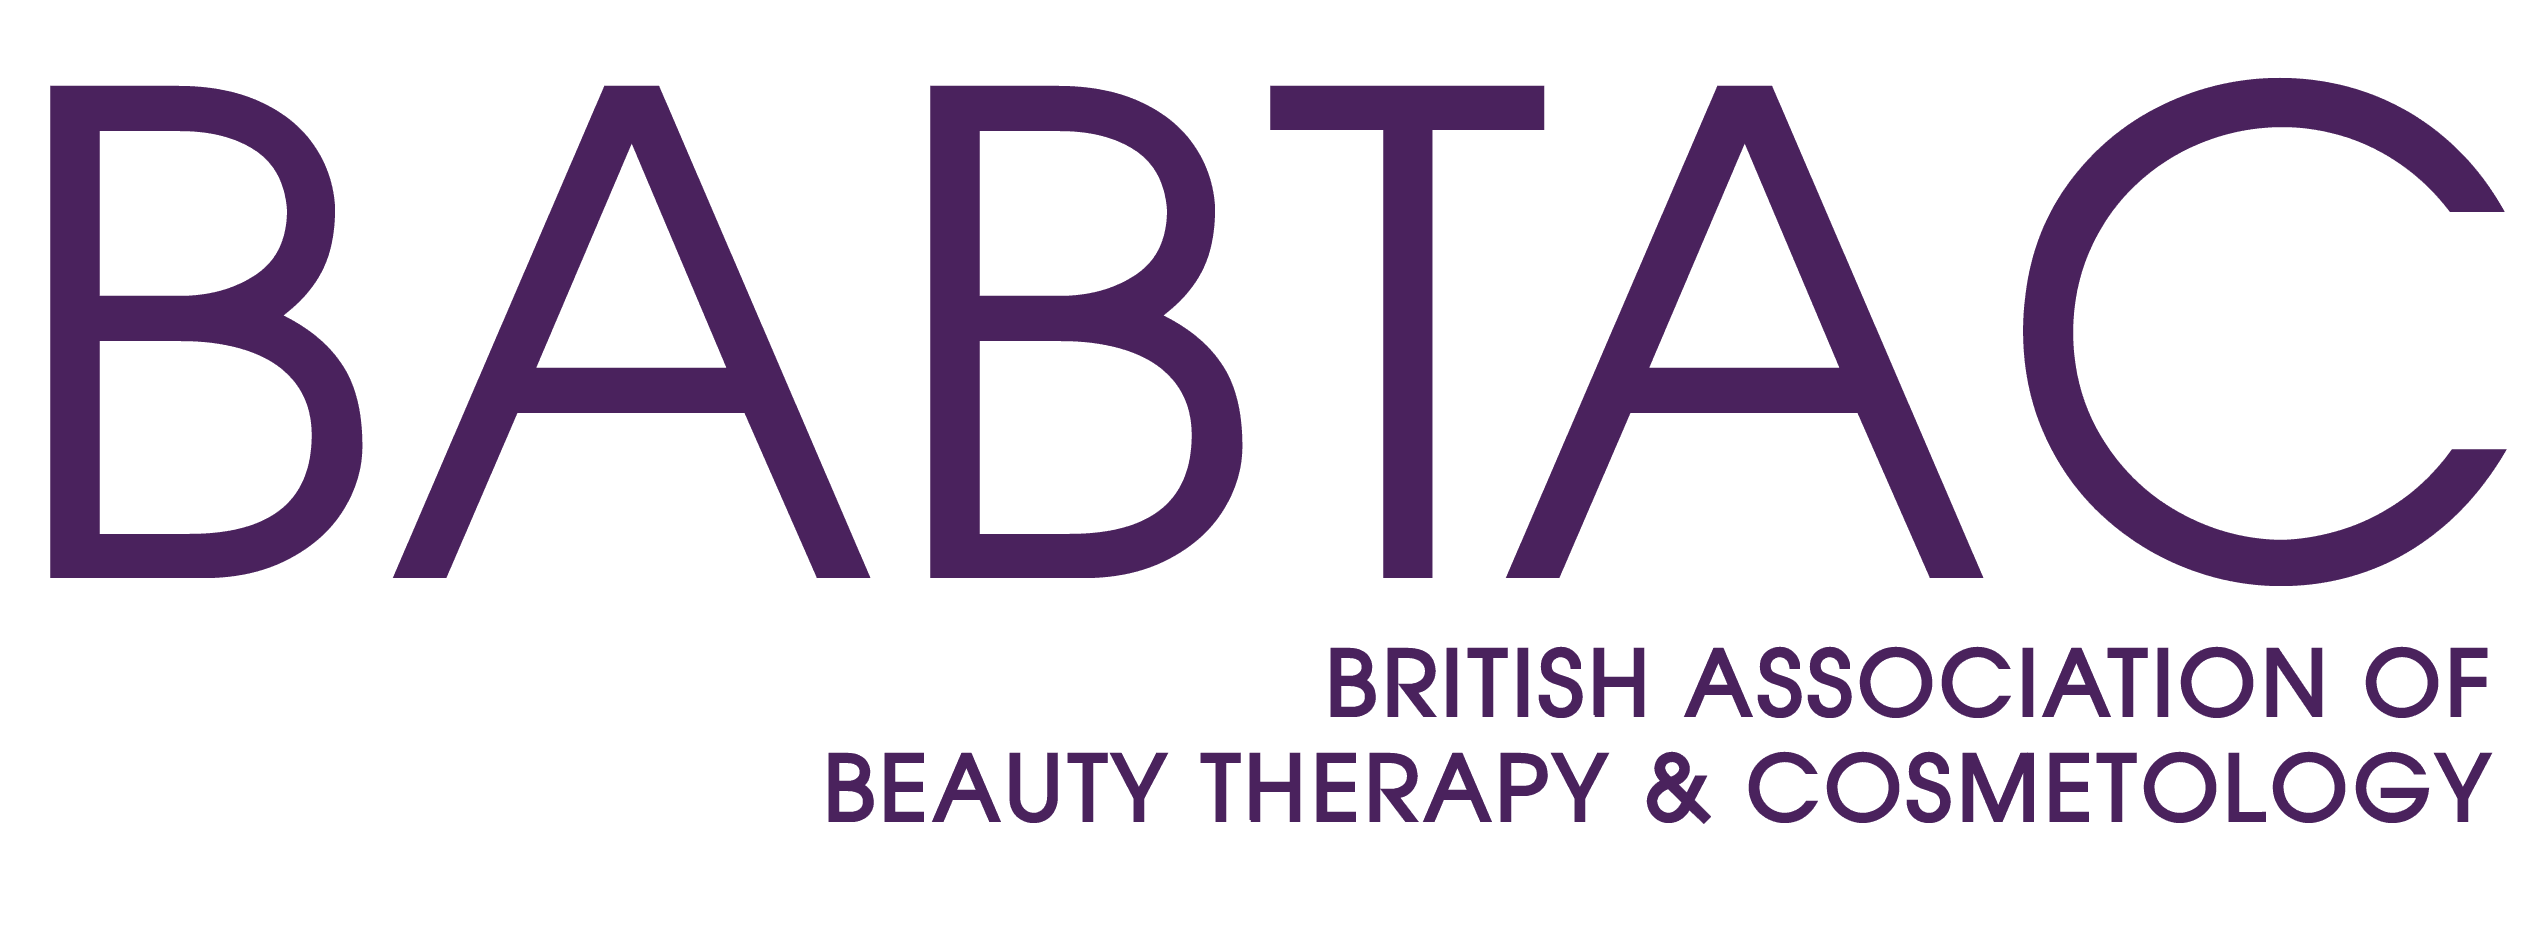 British Association of Beauty Therapy and Cosmetology (BABTAC) Logo